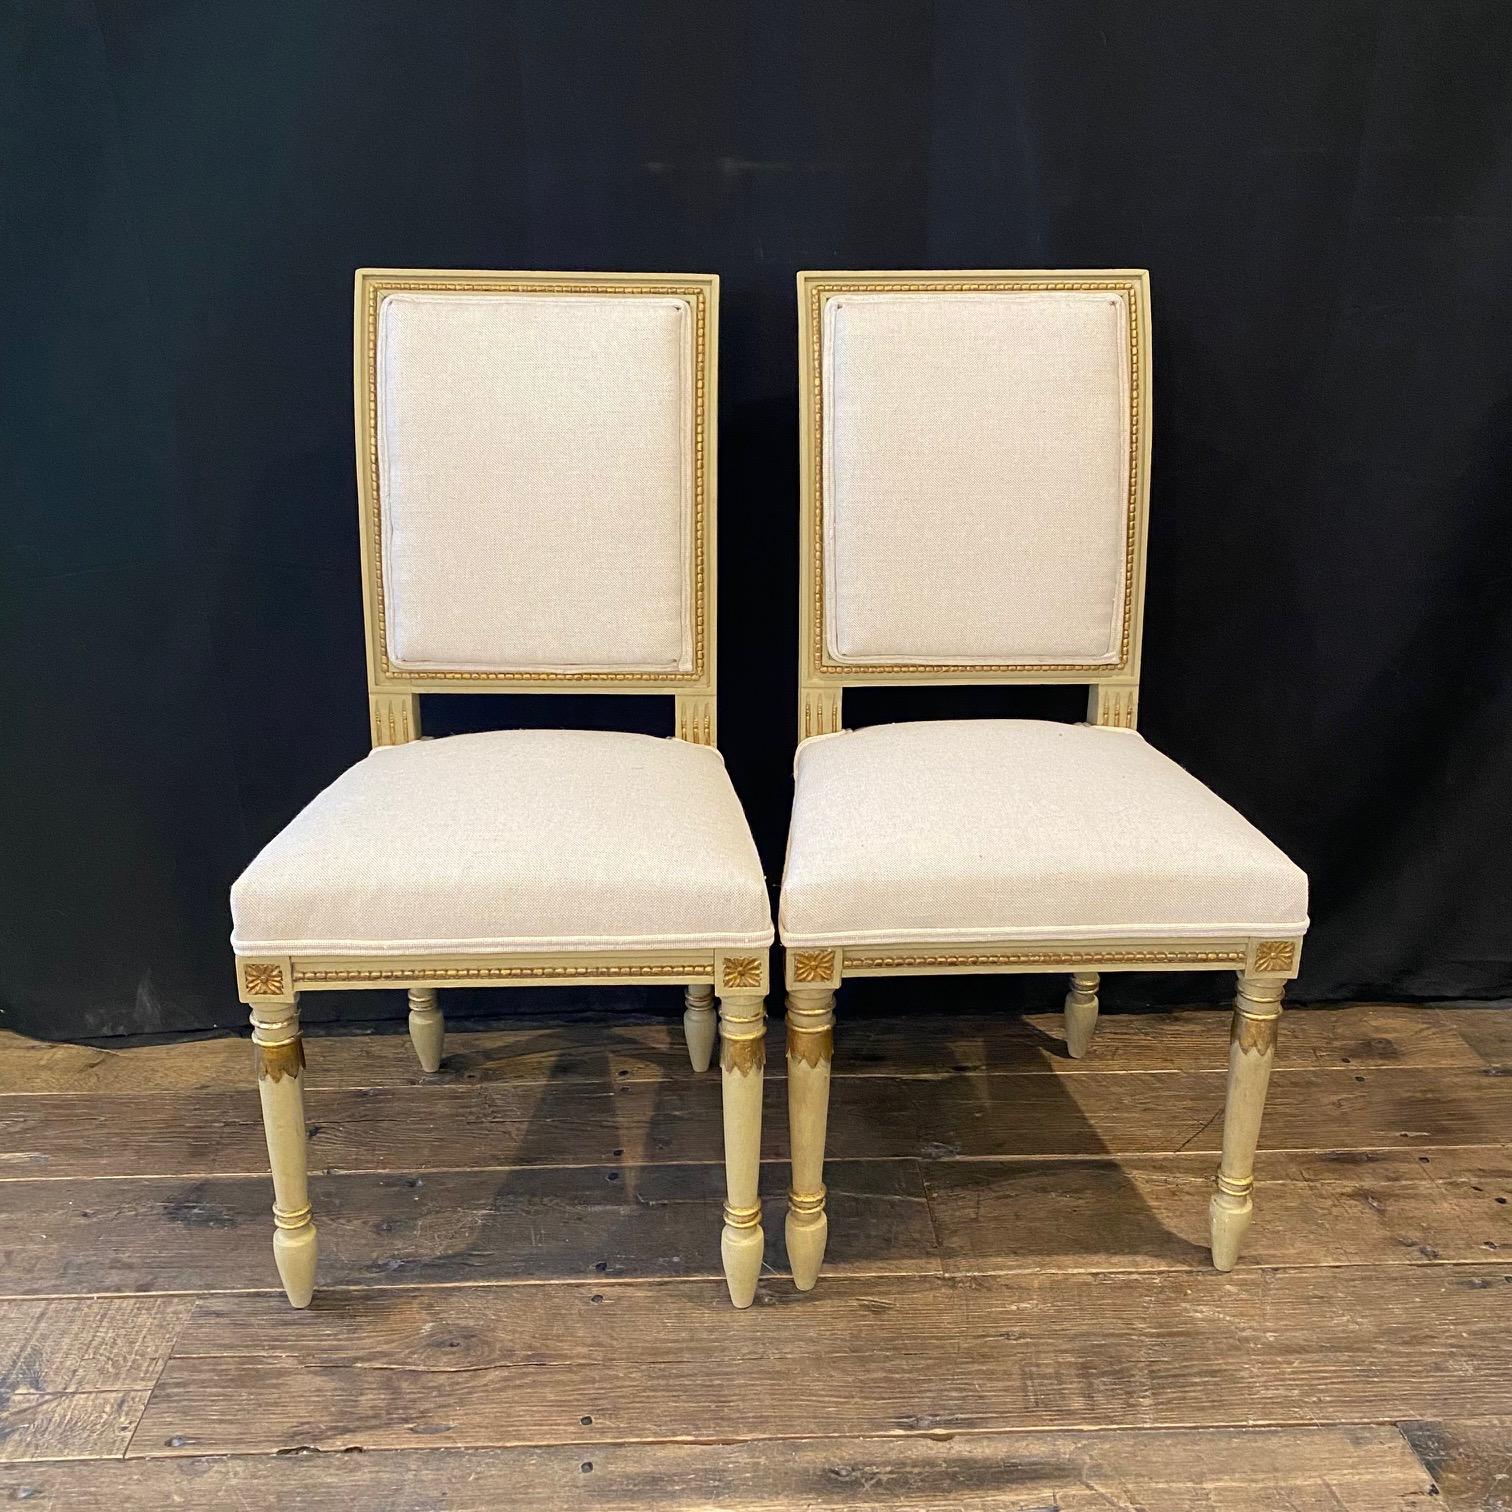 Stunning Pair of 19th Century French Neoclassical Armchairs For Sale 1